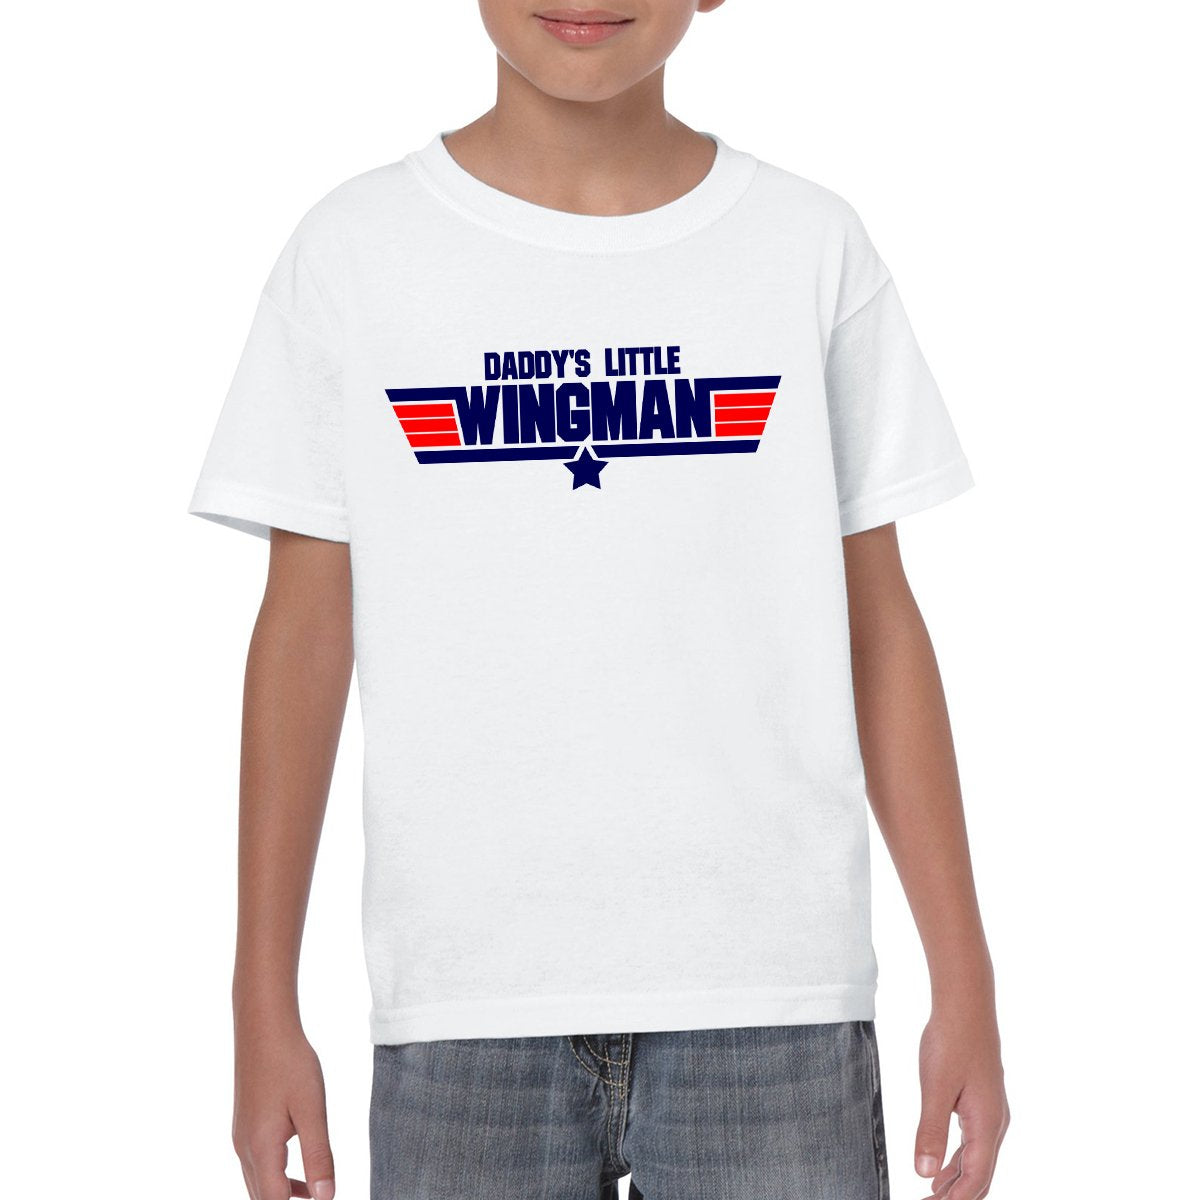 DADDY's LITTLE WINGMAN Youth Semi-Fitted T-Shirt